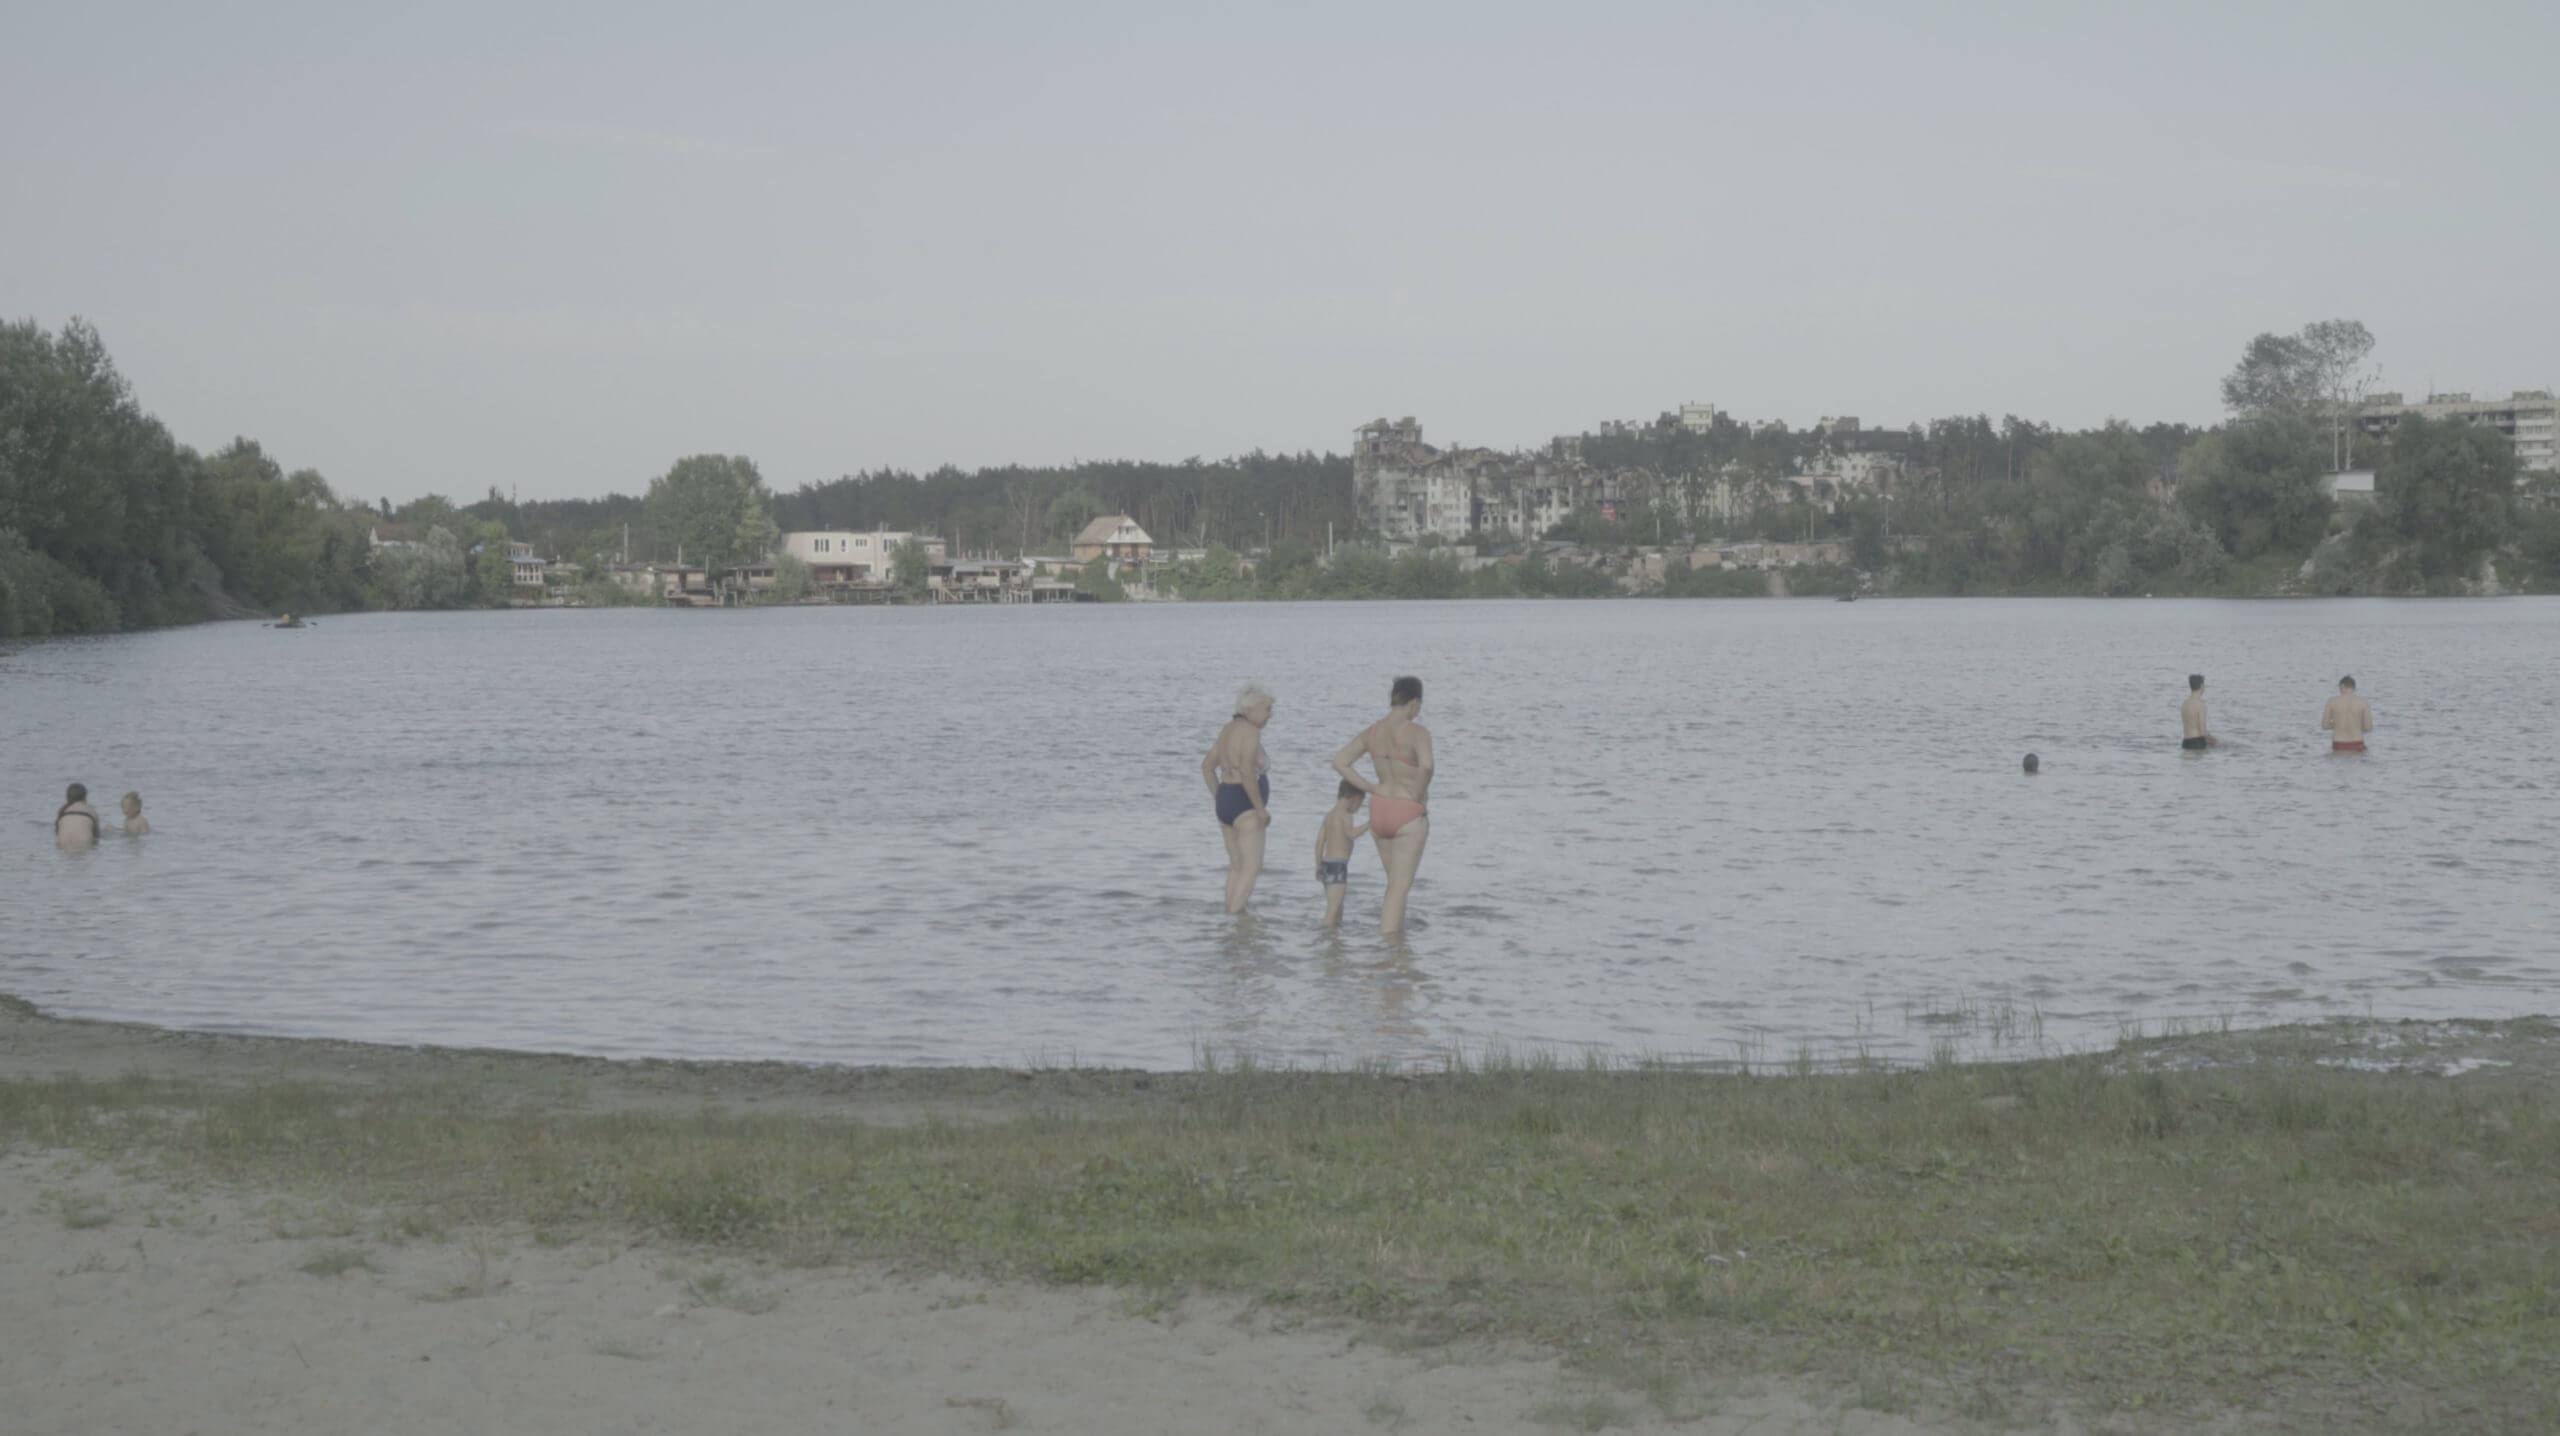 Still from Intercepted. A lake is shown from the shoreline. Various people in bathing suits are shown wading in the far left and right of the frame. Two women and their grandson are in the middle, with their backs to the camera. In the far background, across the lake, recently bombed buildings are visible.